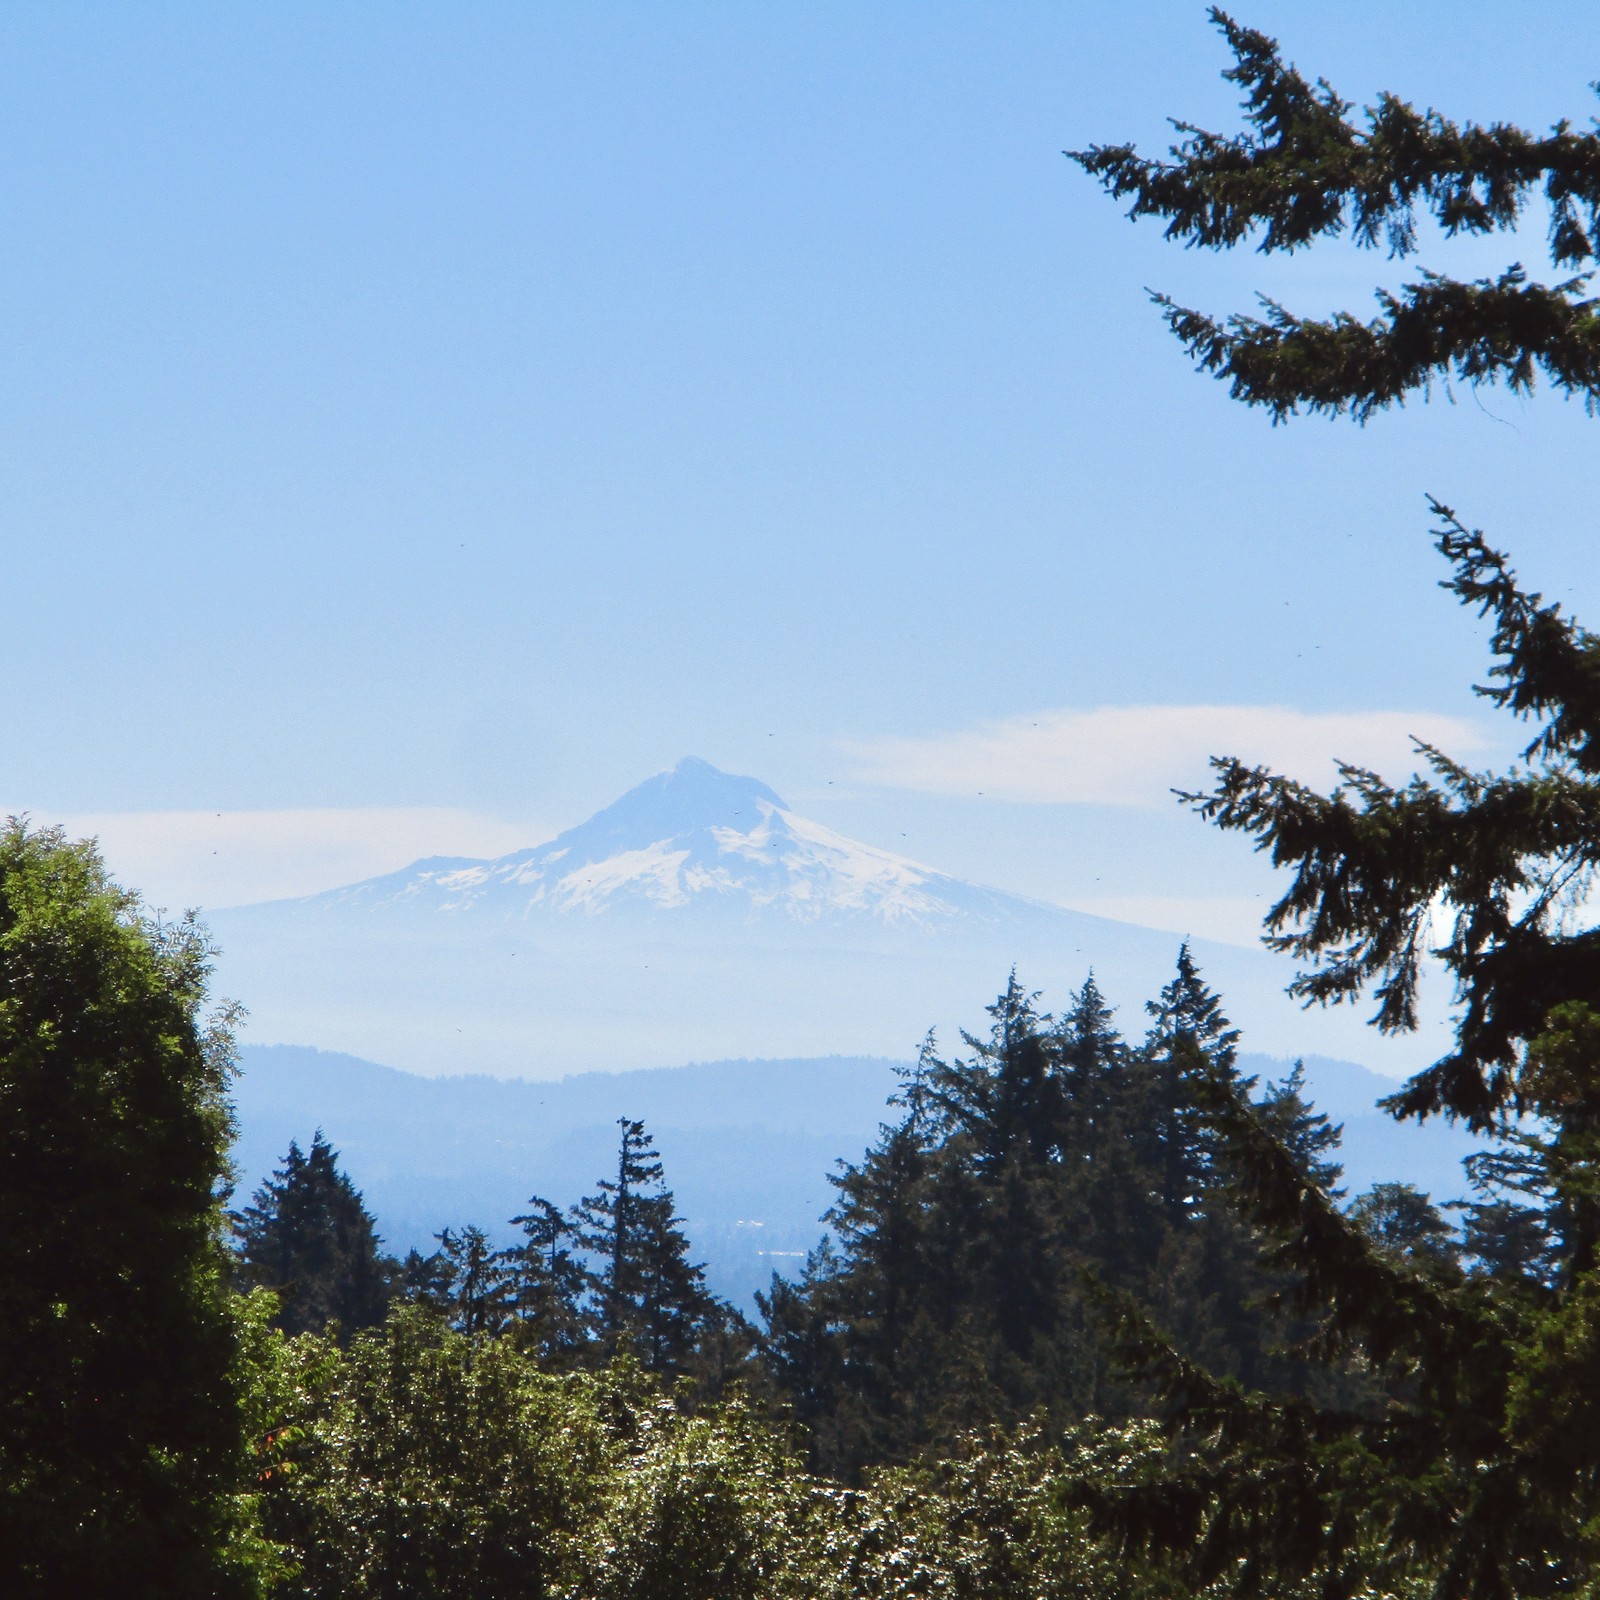 Mt. Hood on a slightly hazy, already quite hot summer day. Photo slightly zoomed to highlight some features of the glaciers — which are still quite full